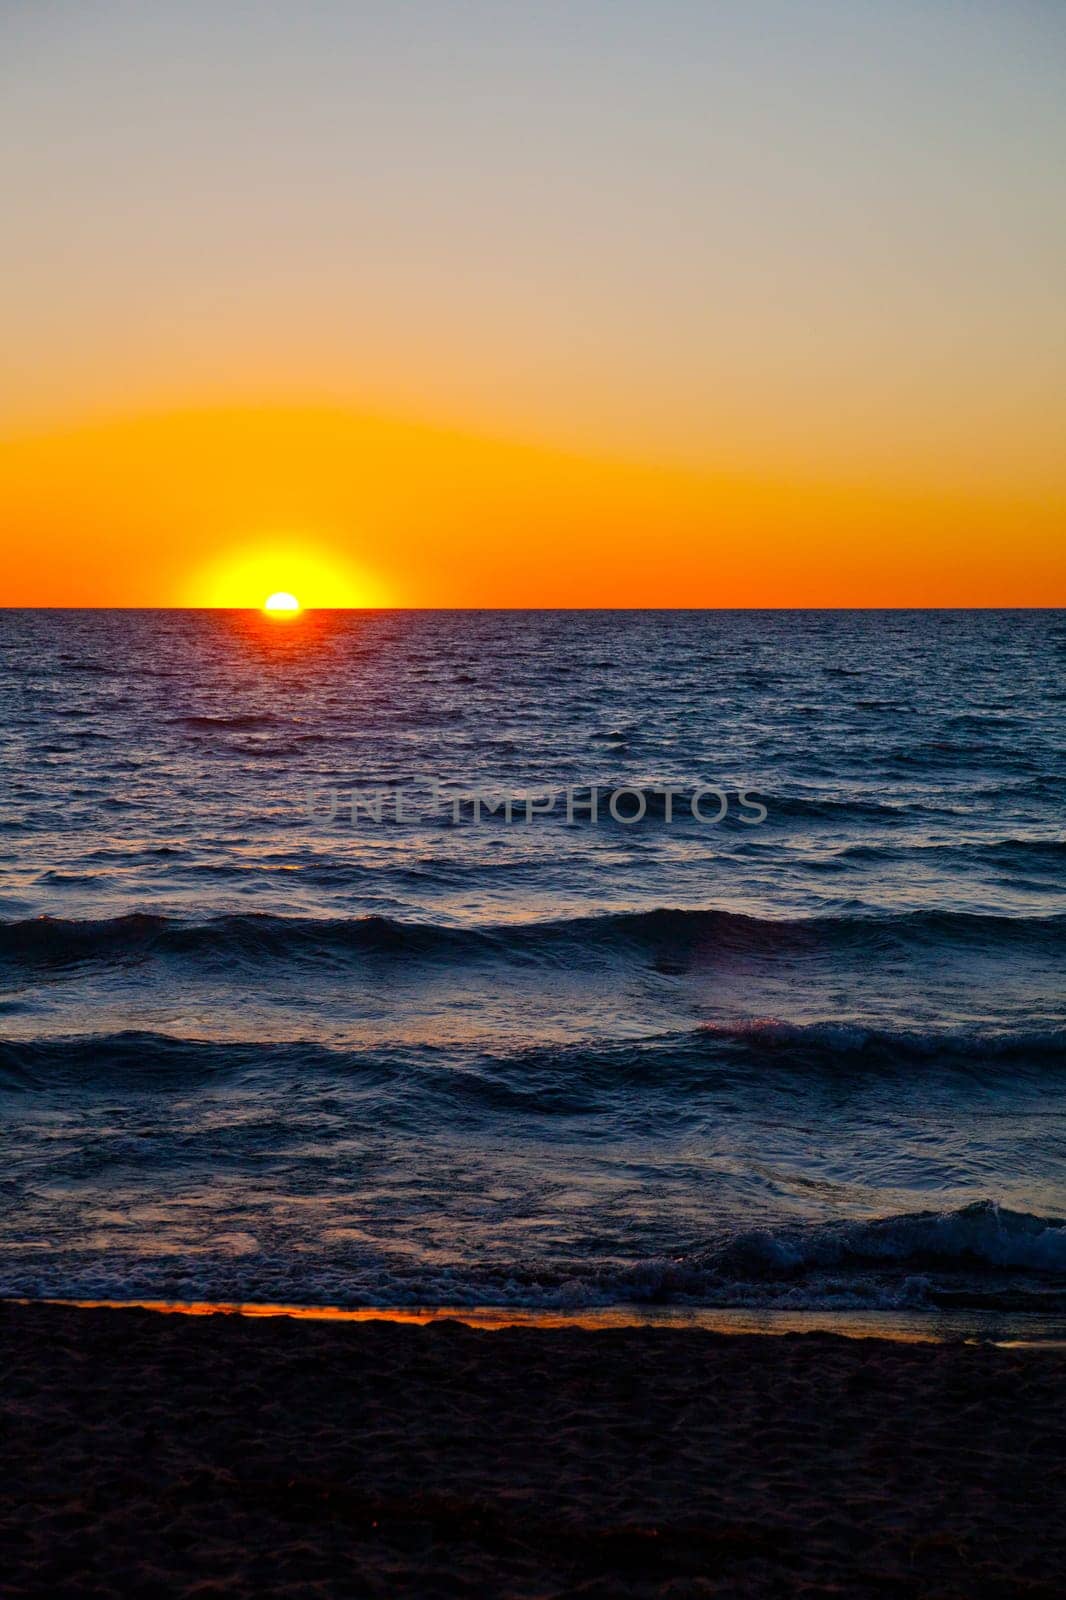 Mesmerizing sunset over Lake Michigan, casting a vibrant orange glow on the expansive beach. Tranquil and serene, a perfect natural landscape.